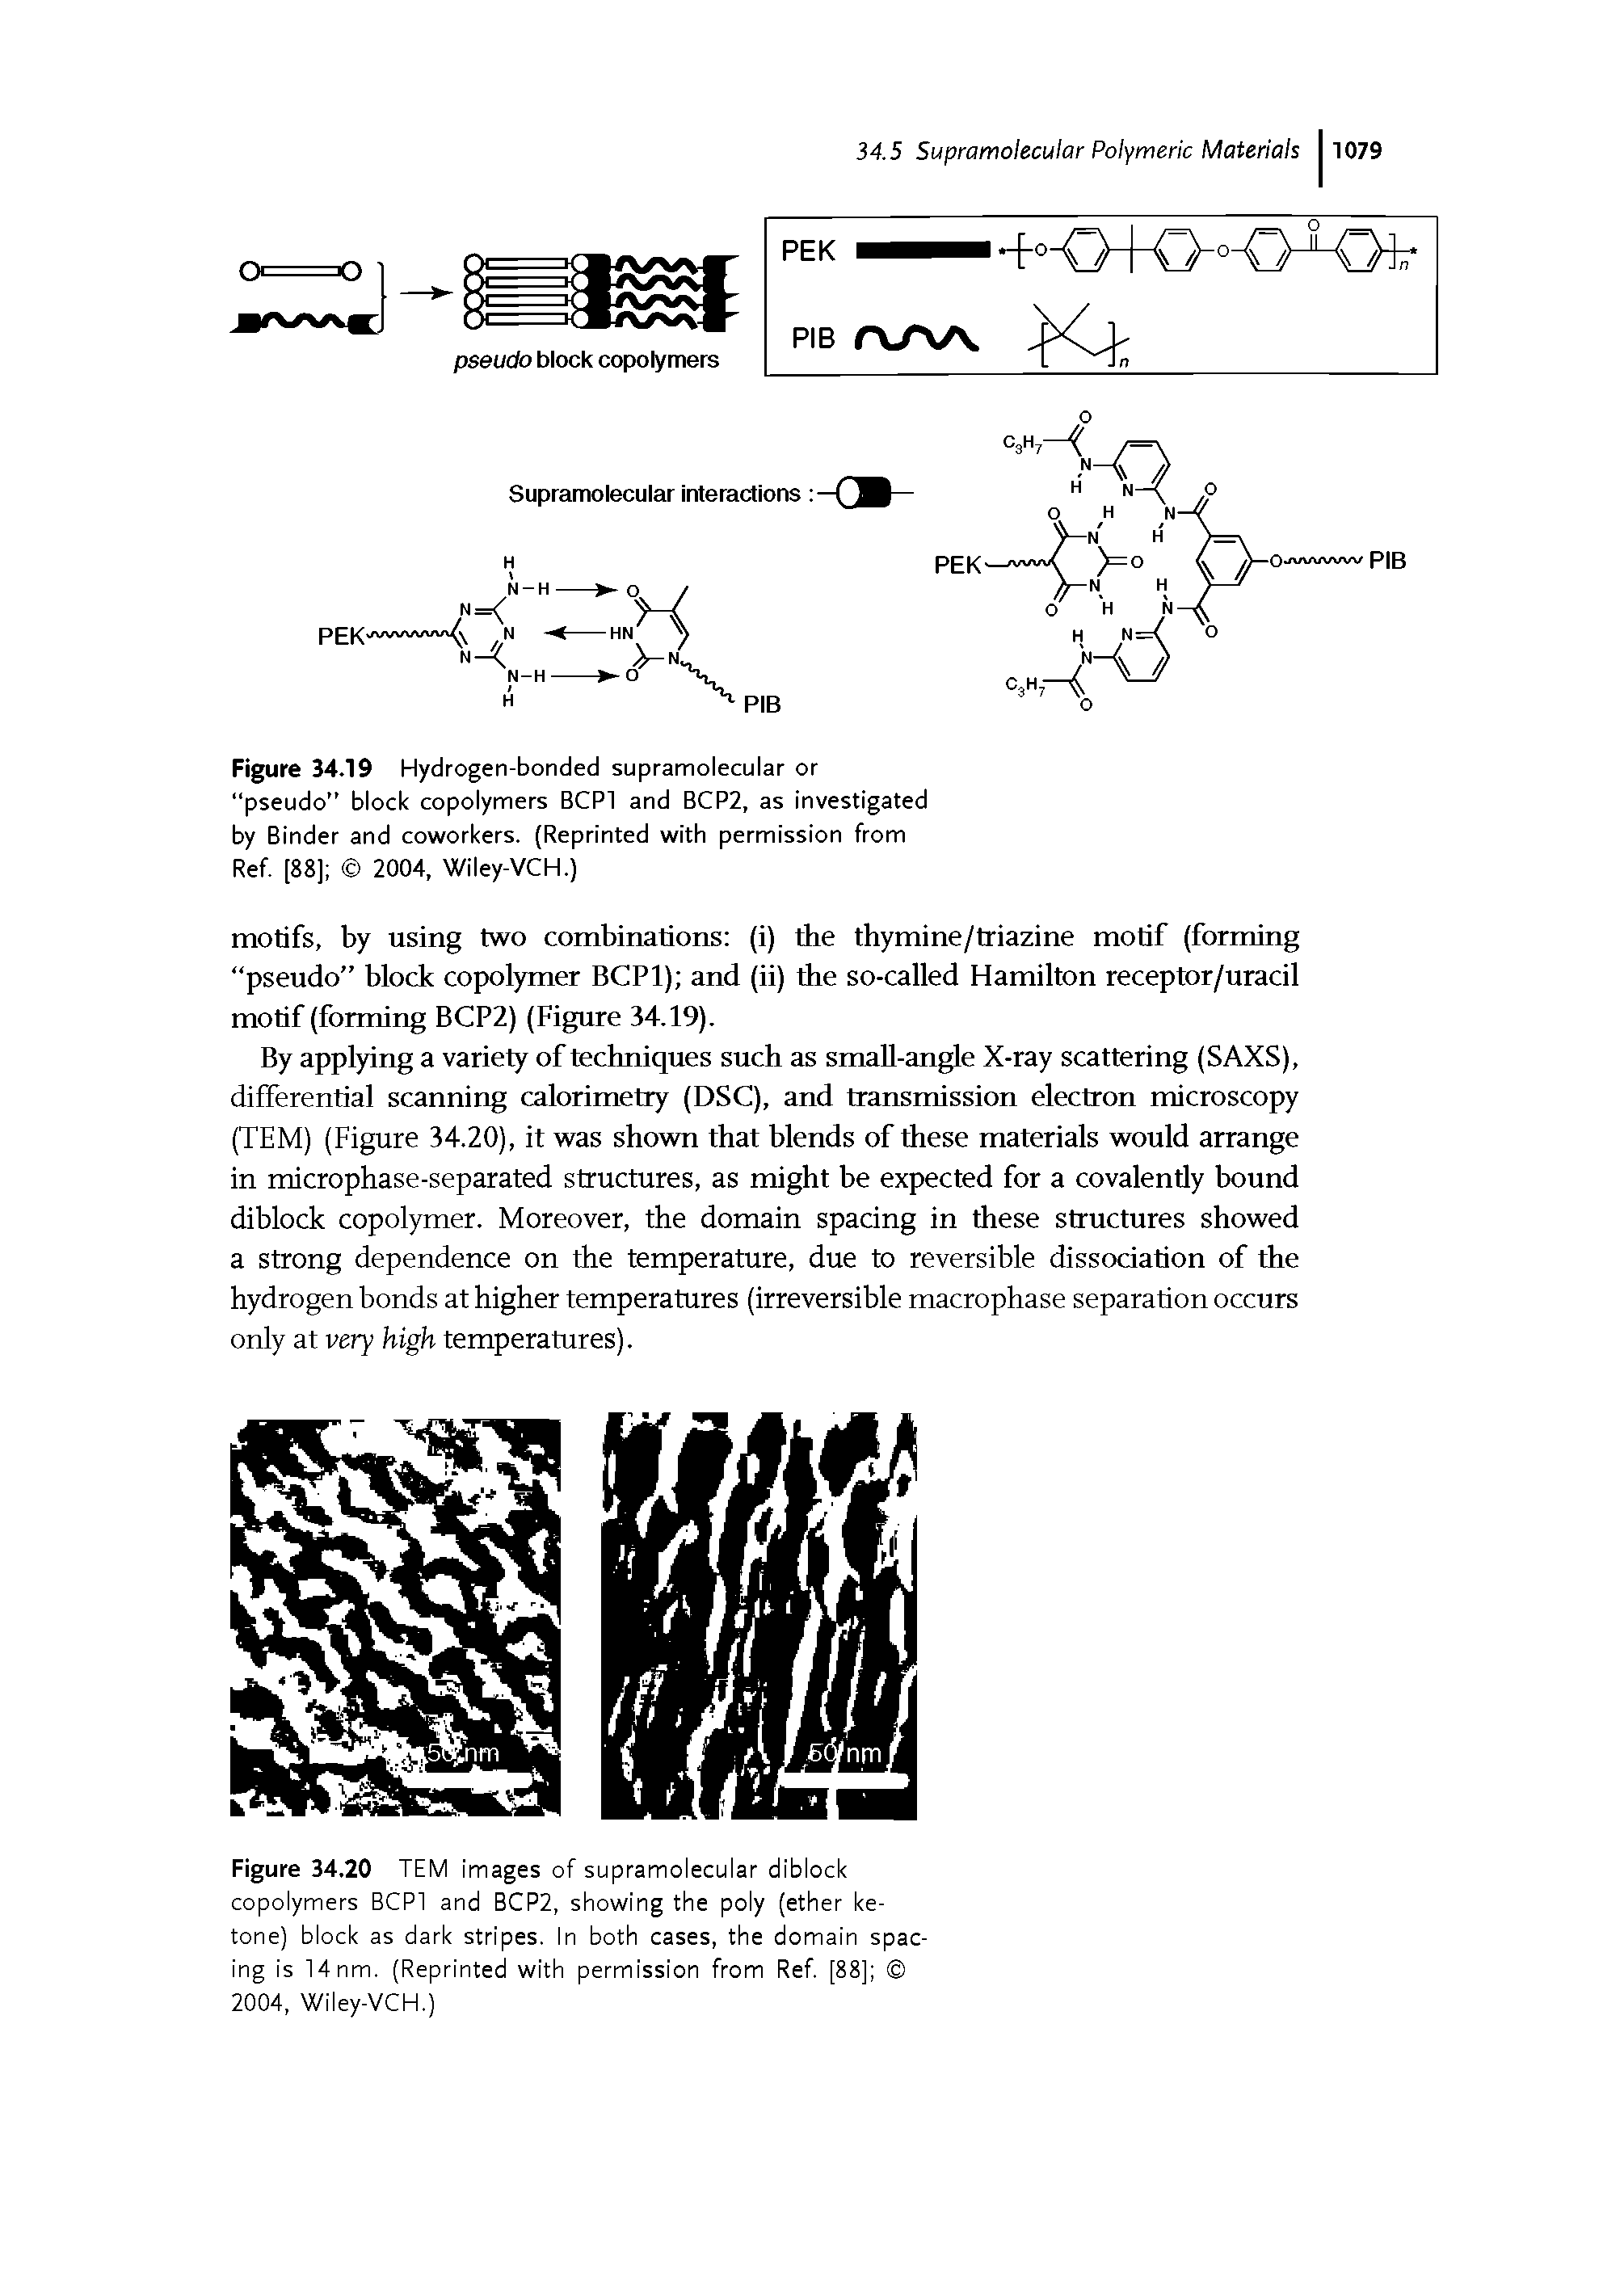 Figure 34.19 Hydrogen-bonded supramolecular or pseudo" block copolymers BCPl and BCP2, as investigated by Binder and coworkers. (Reprinted with permission from Ref. [88] 2004, Wiley-VCH.)...